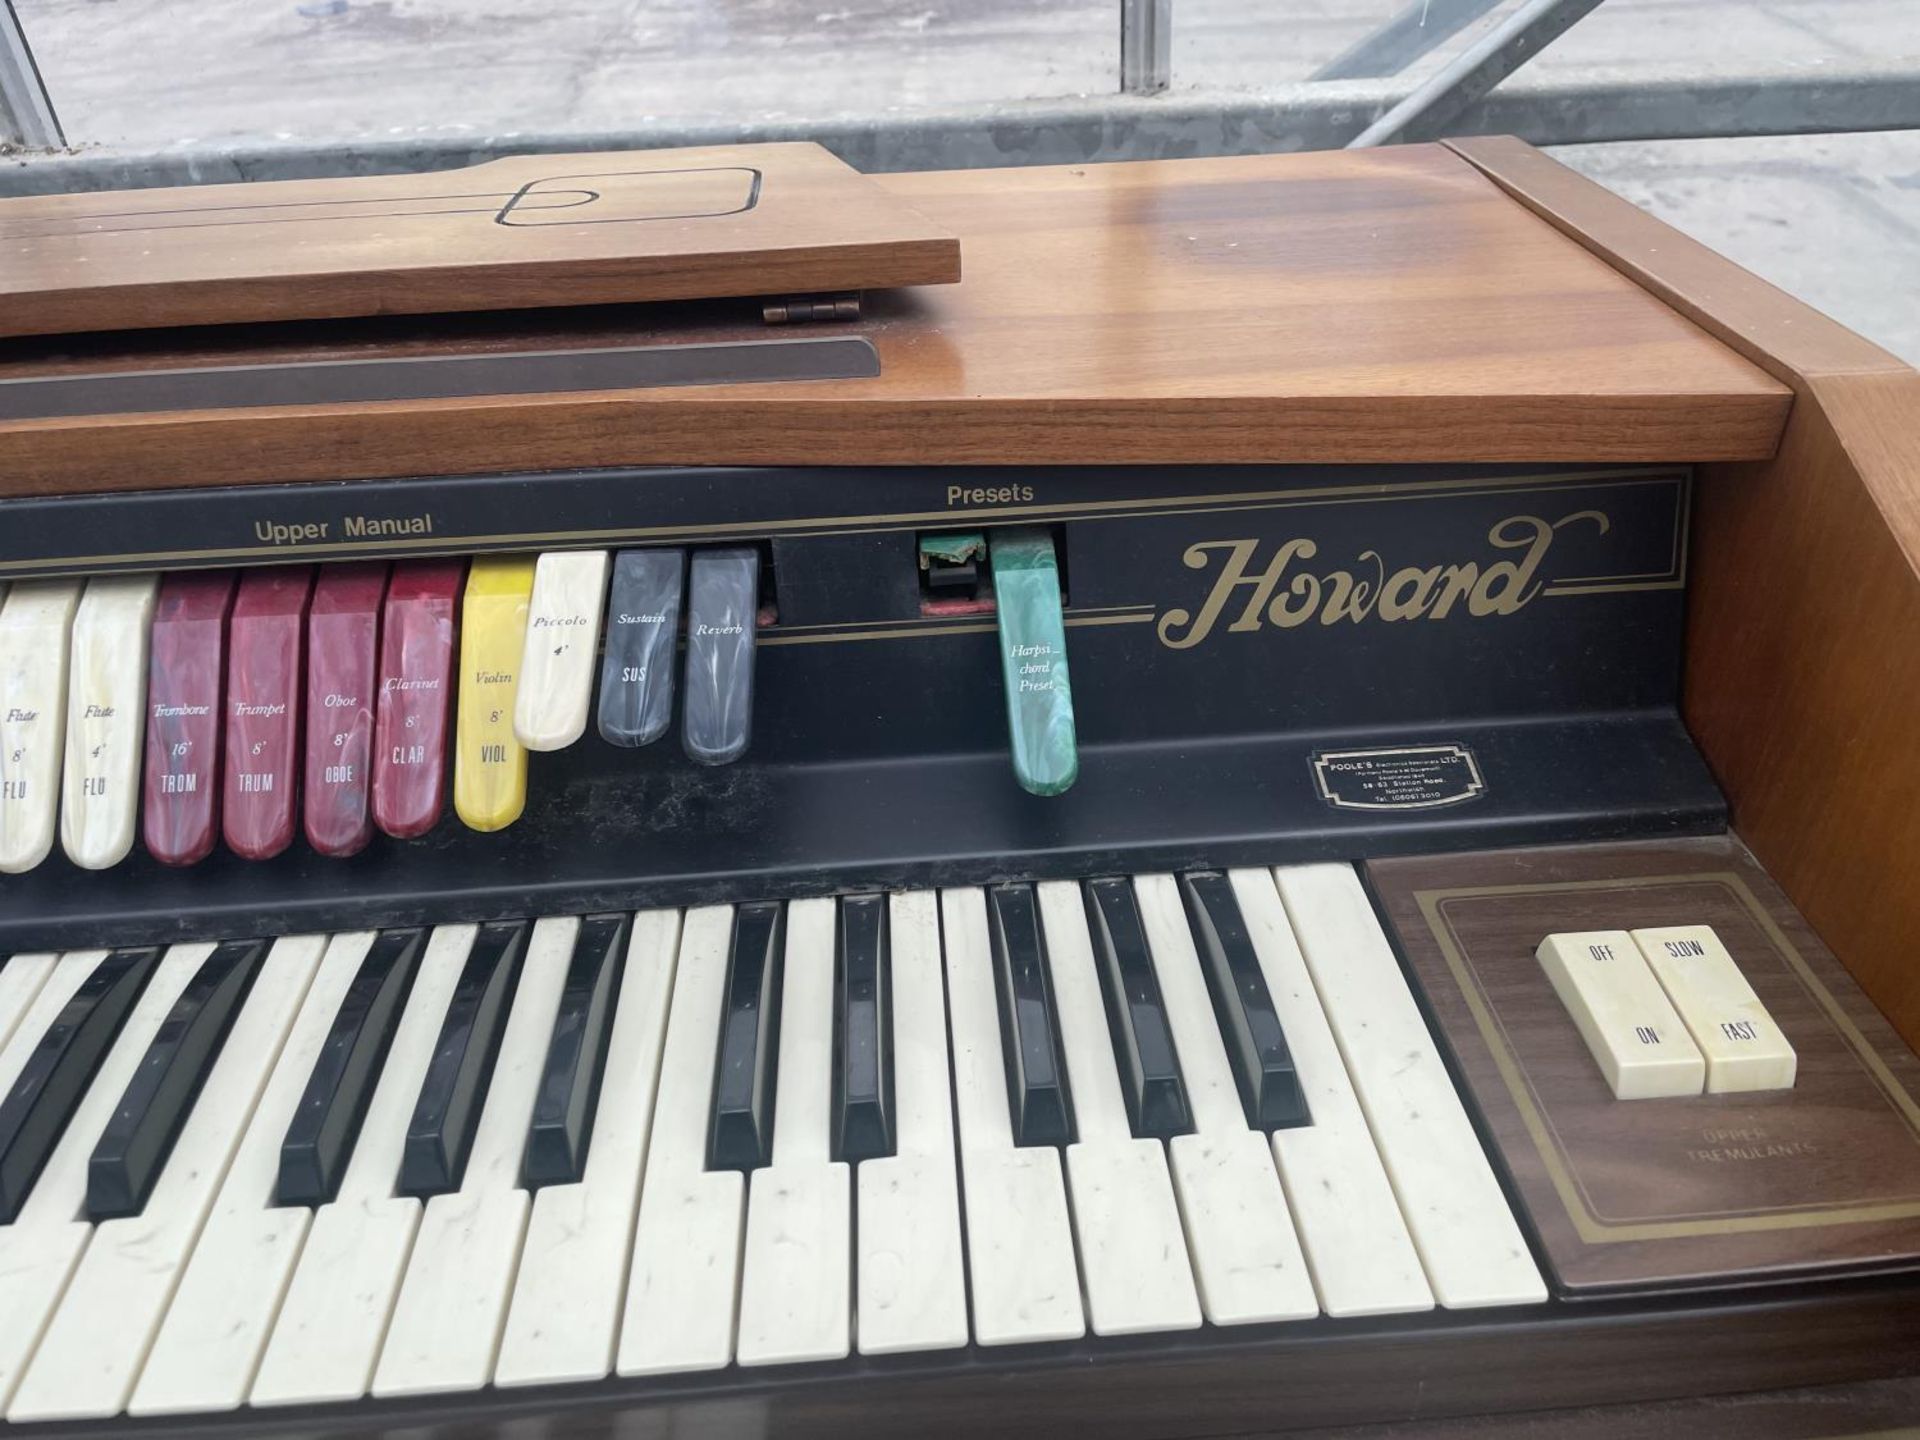 A HOWARD 245 ELECTRIC ORGAN BELIEVED IN WORKING ORDER BUT NO WARRANTY - Image 2 of 3